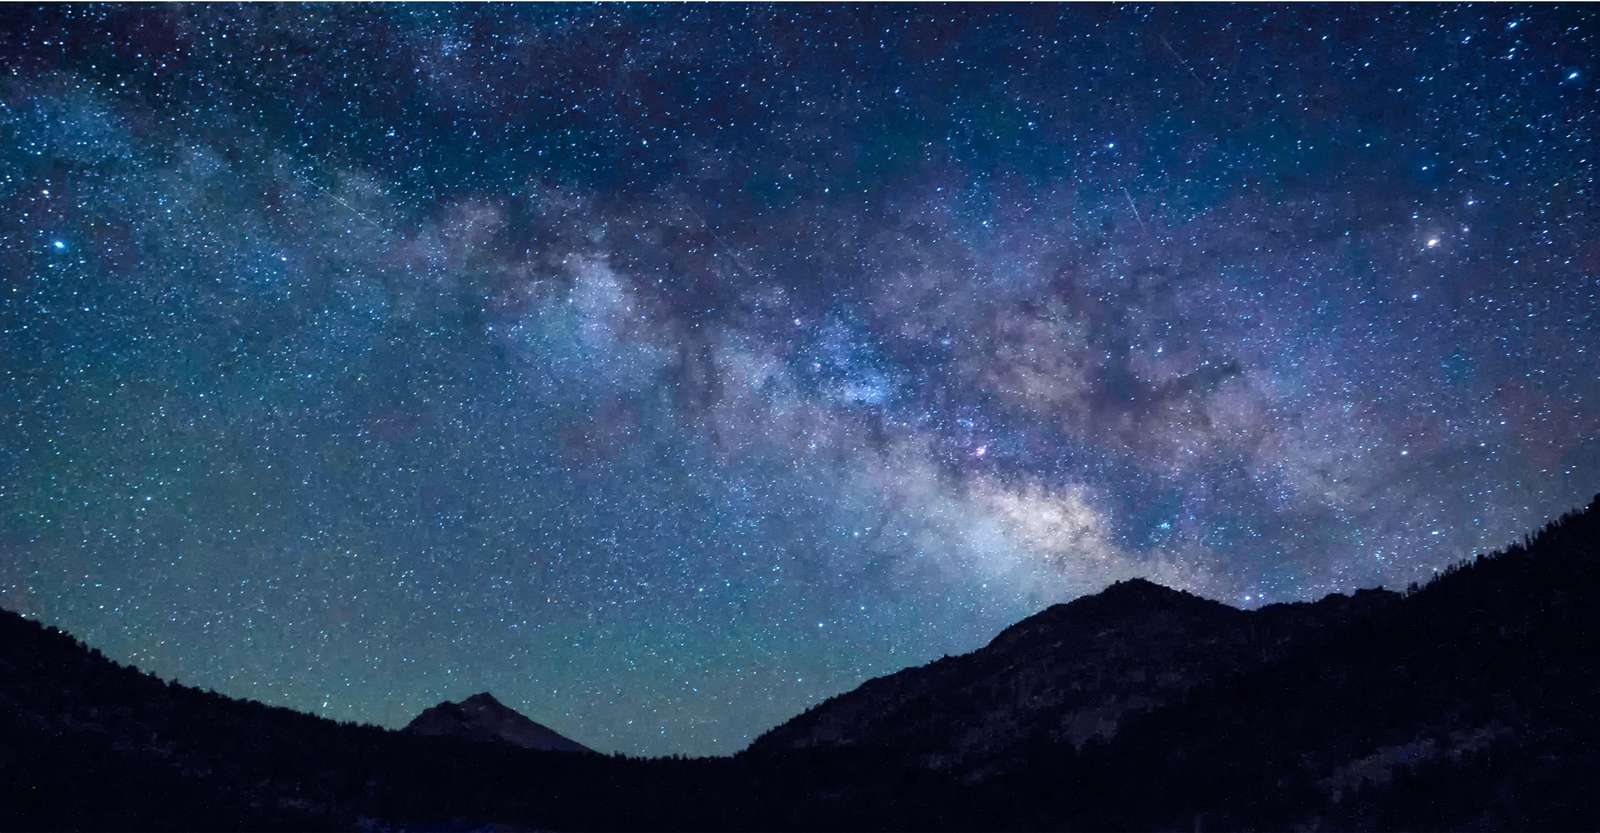 5 TIPS FOR PHOTOGRAPHING THE MILKY WAY | OM SYSTEM